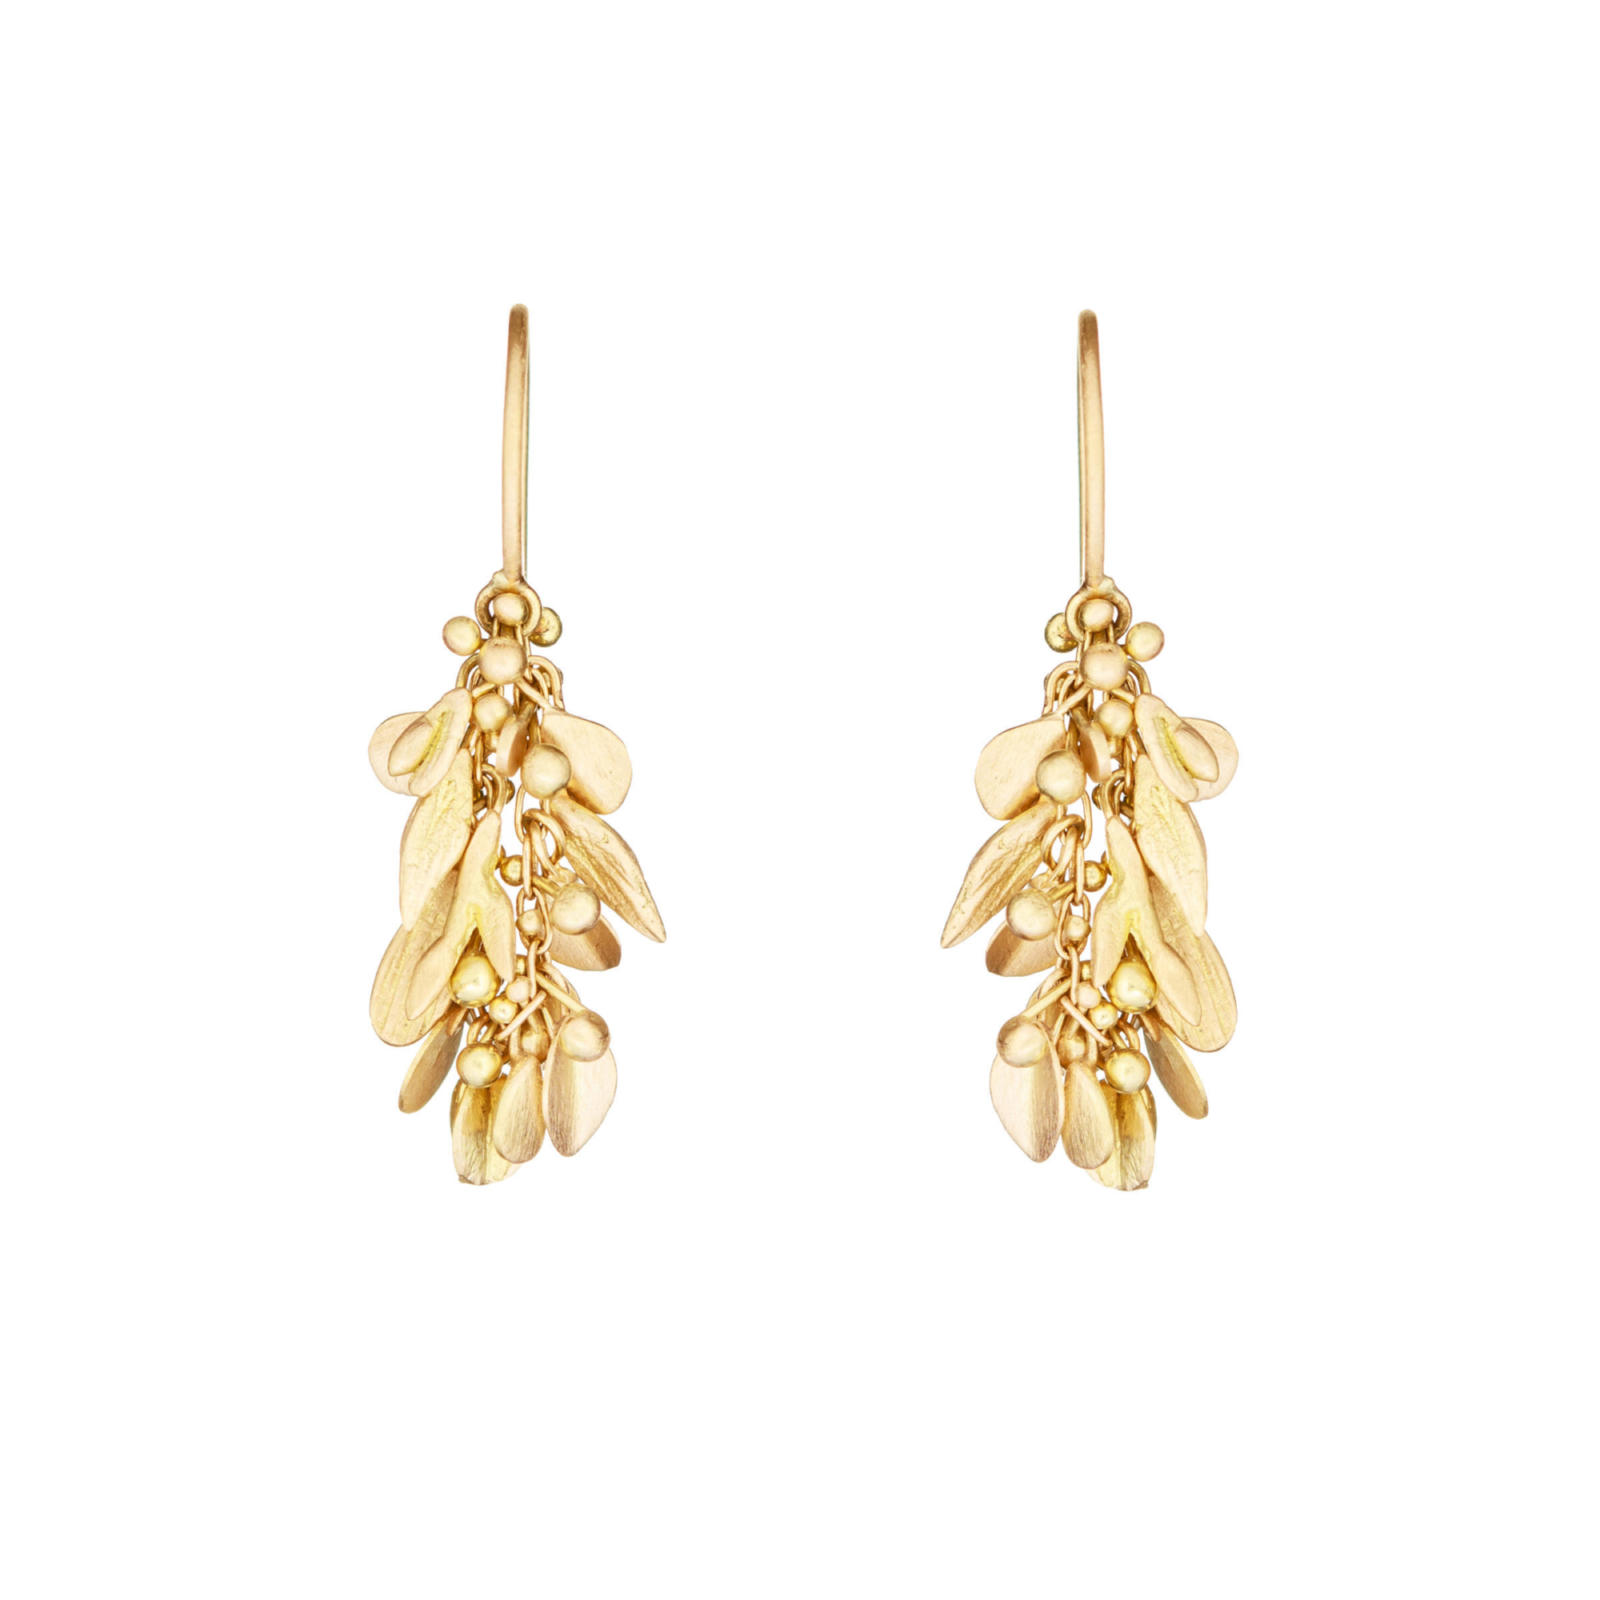 Sia Taylor ME4 Y Yellow Gold Earrings WB